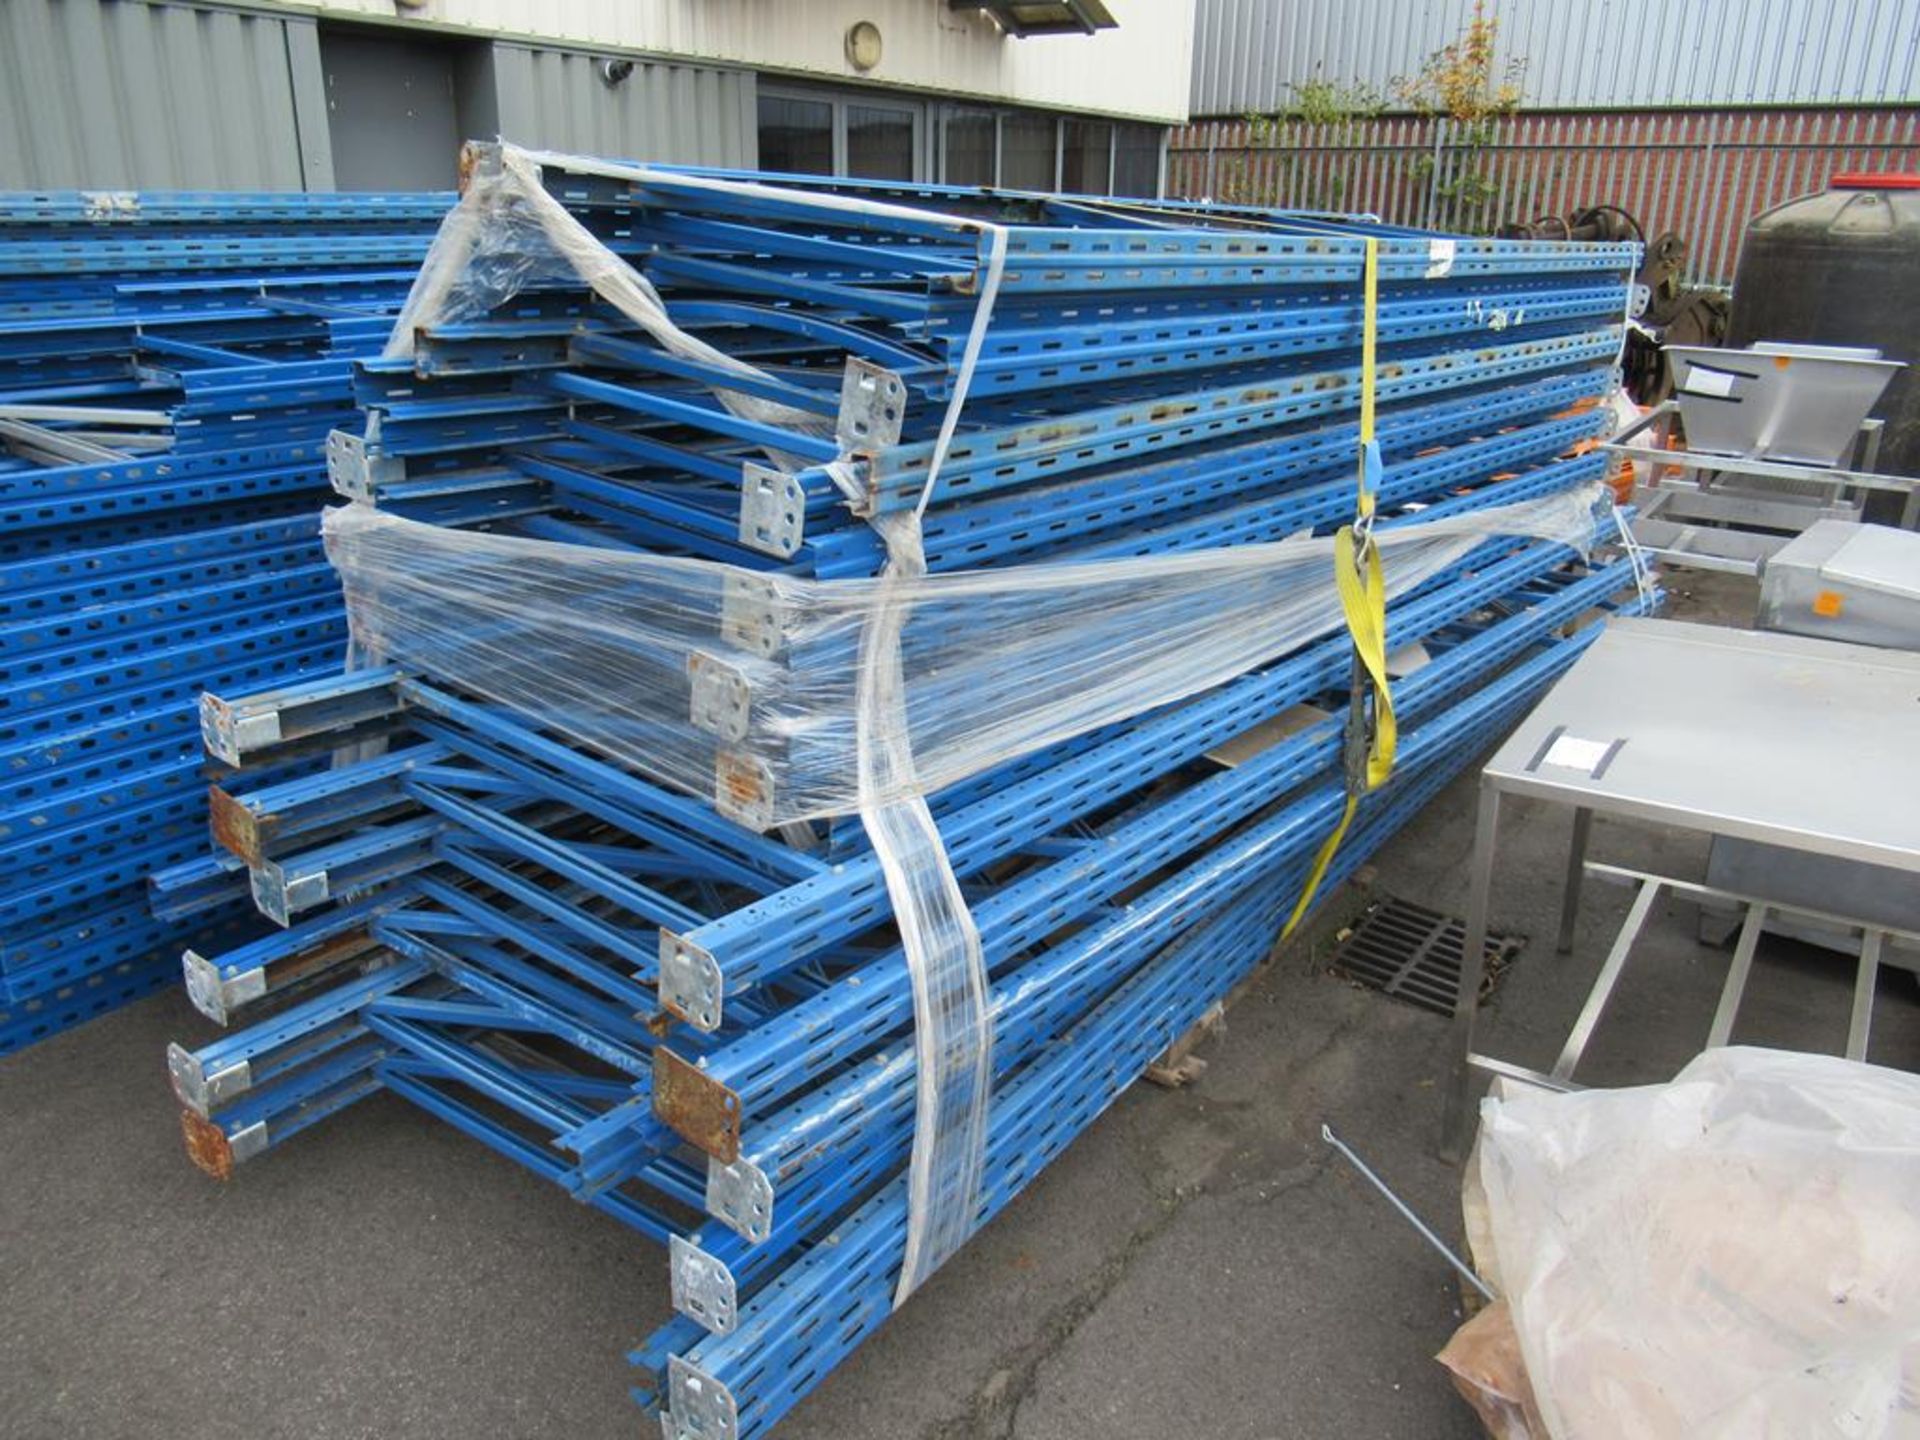 A Selection of Pallet Racking.